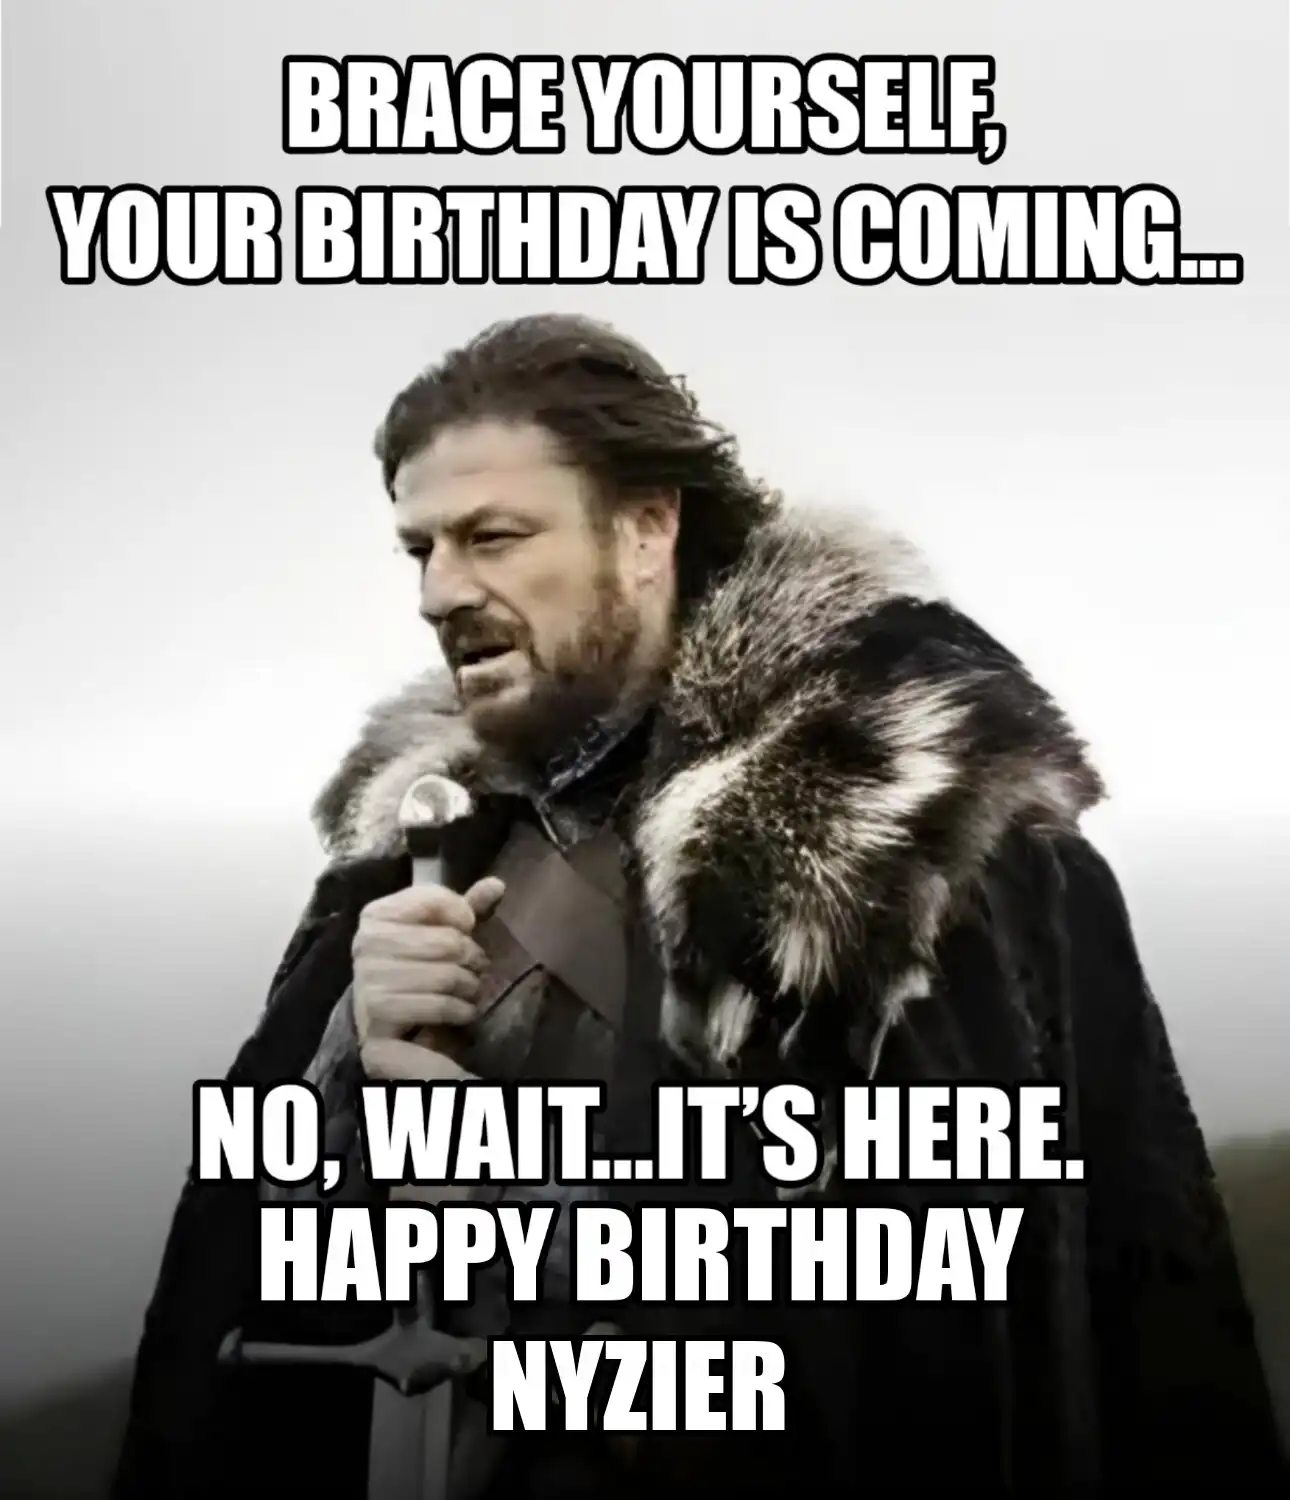 Happy Birthday Nyzier Brace Yourself Your Birthday Is Coming Meme